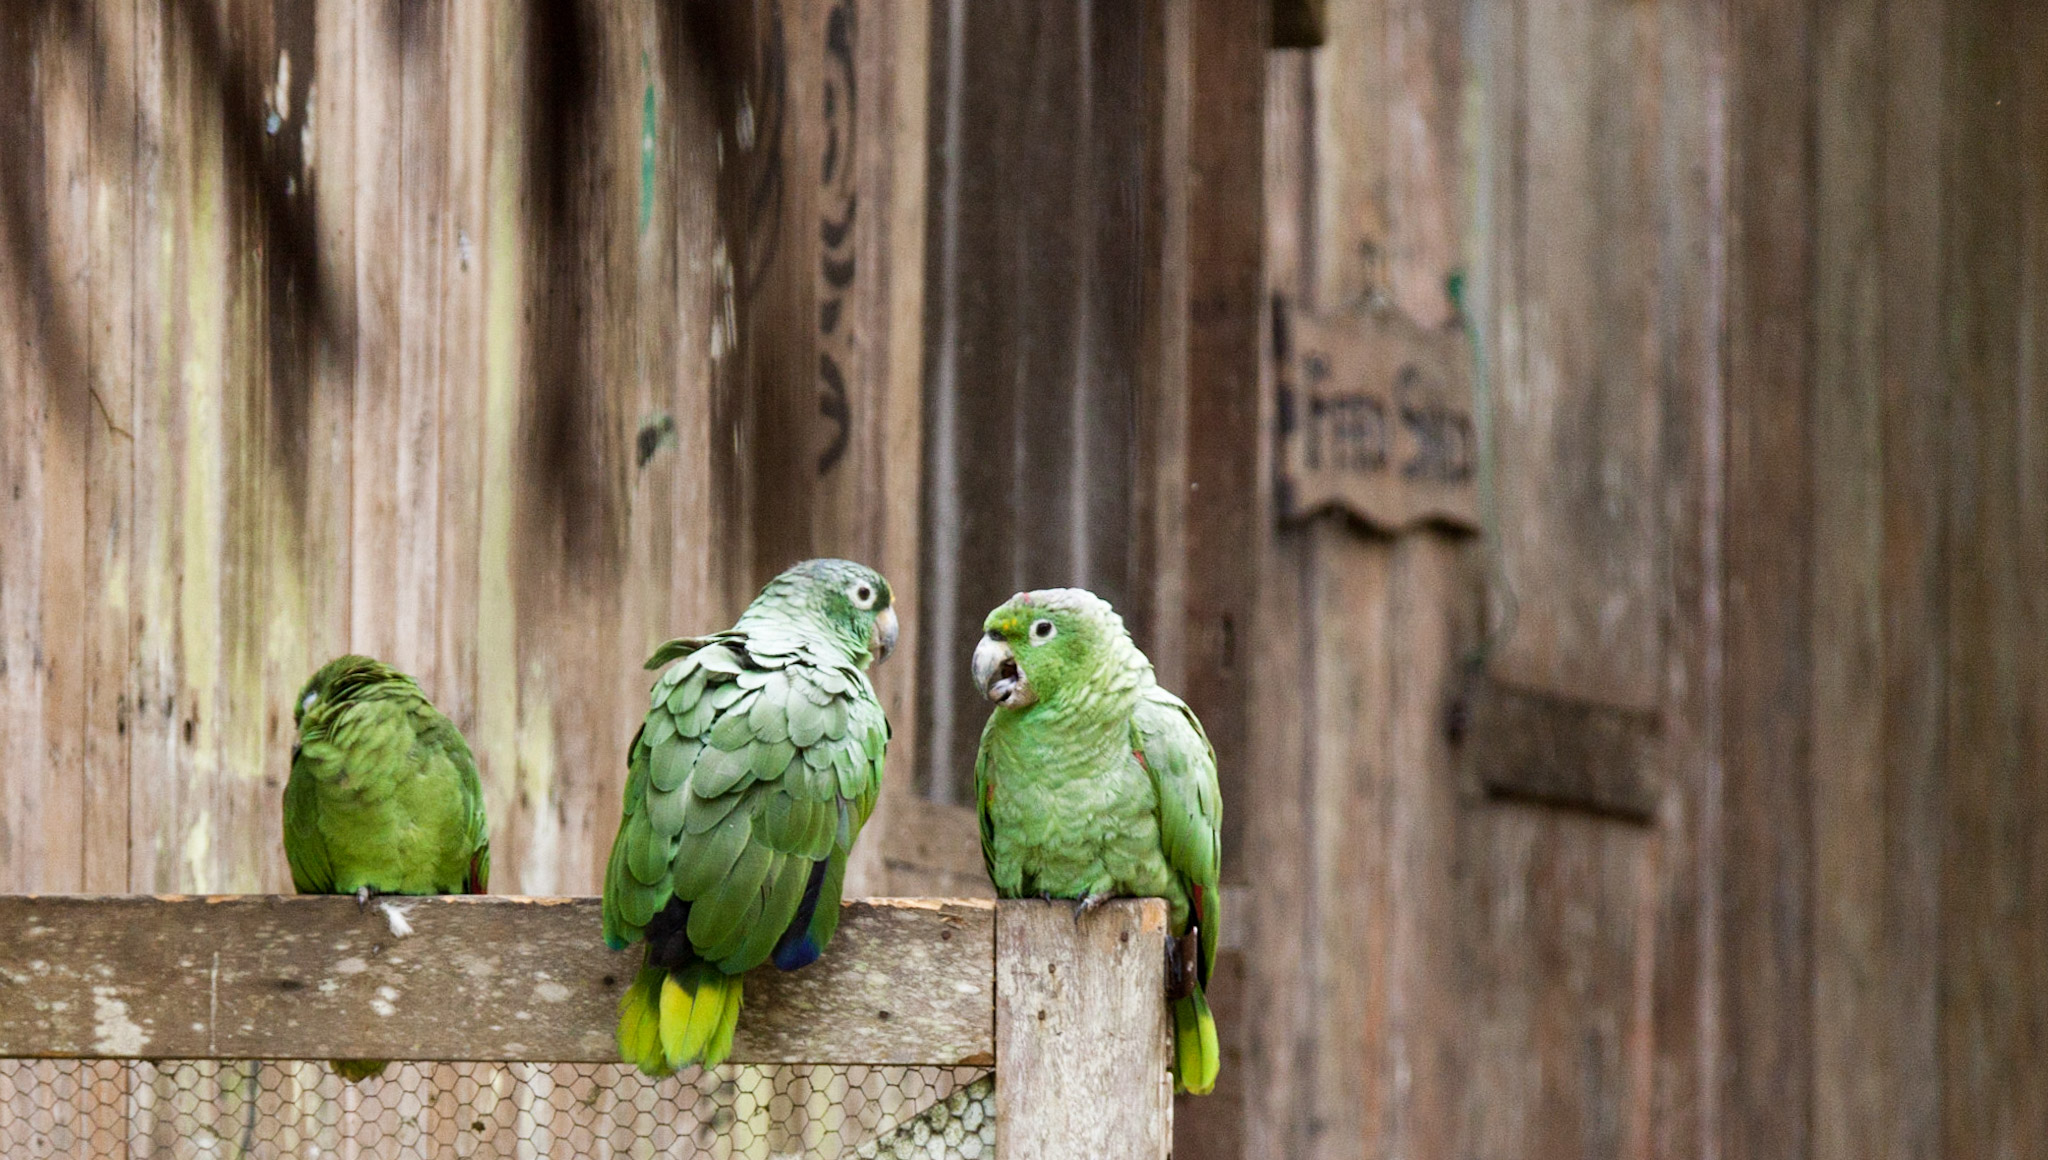 Parrots in the Amazon